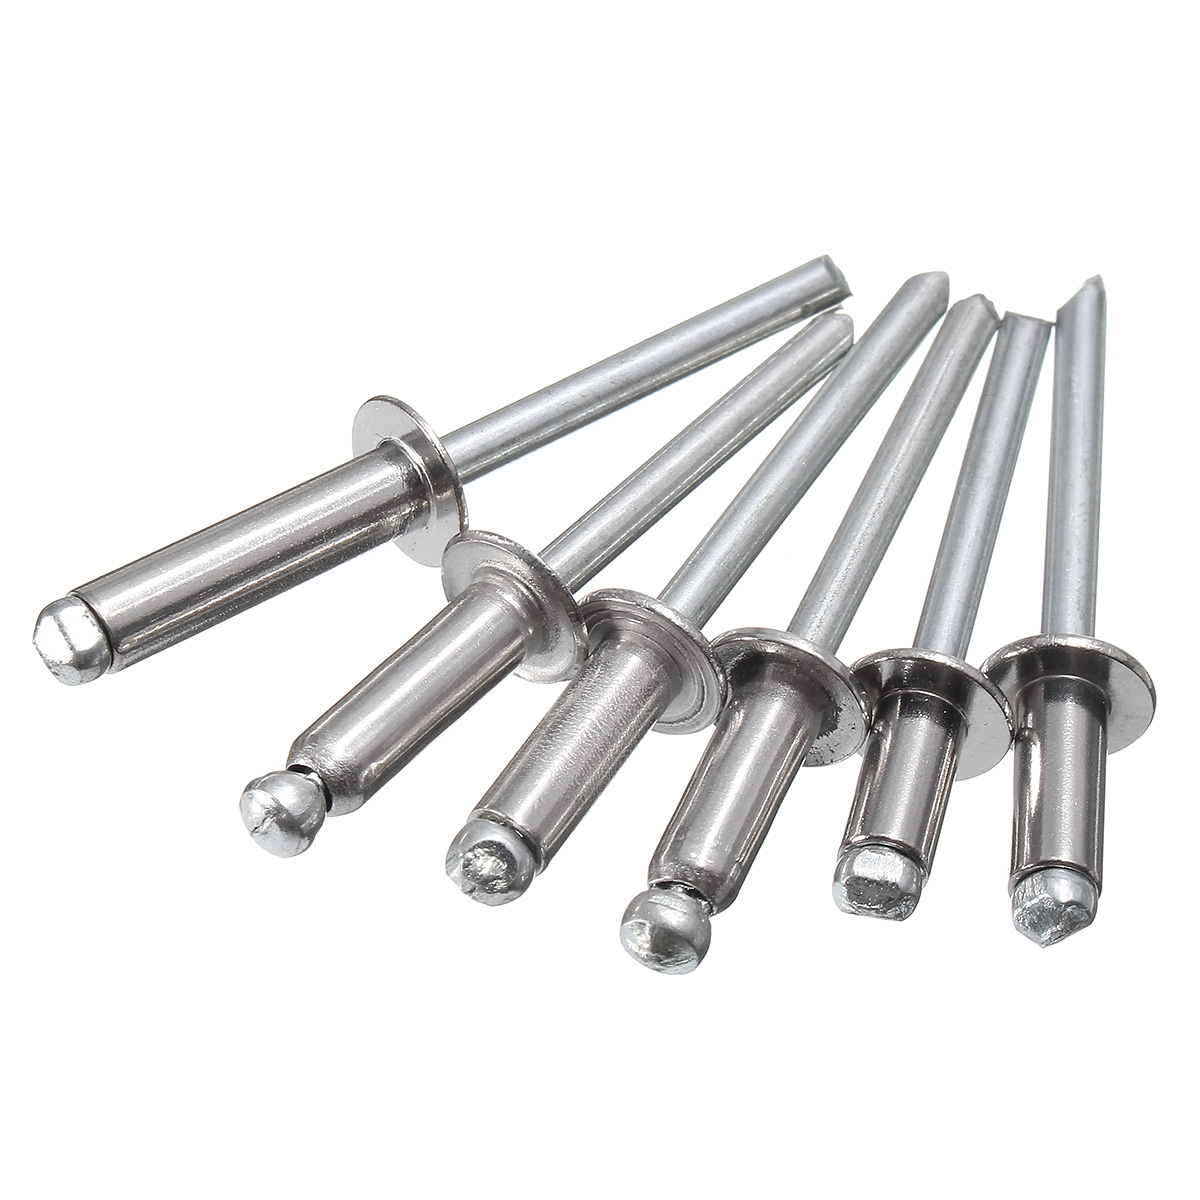 Details about   100pcs 1/8" M3.2 Diameter All Stainless Steel Domed Head Open End Blind Rivet